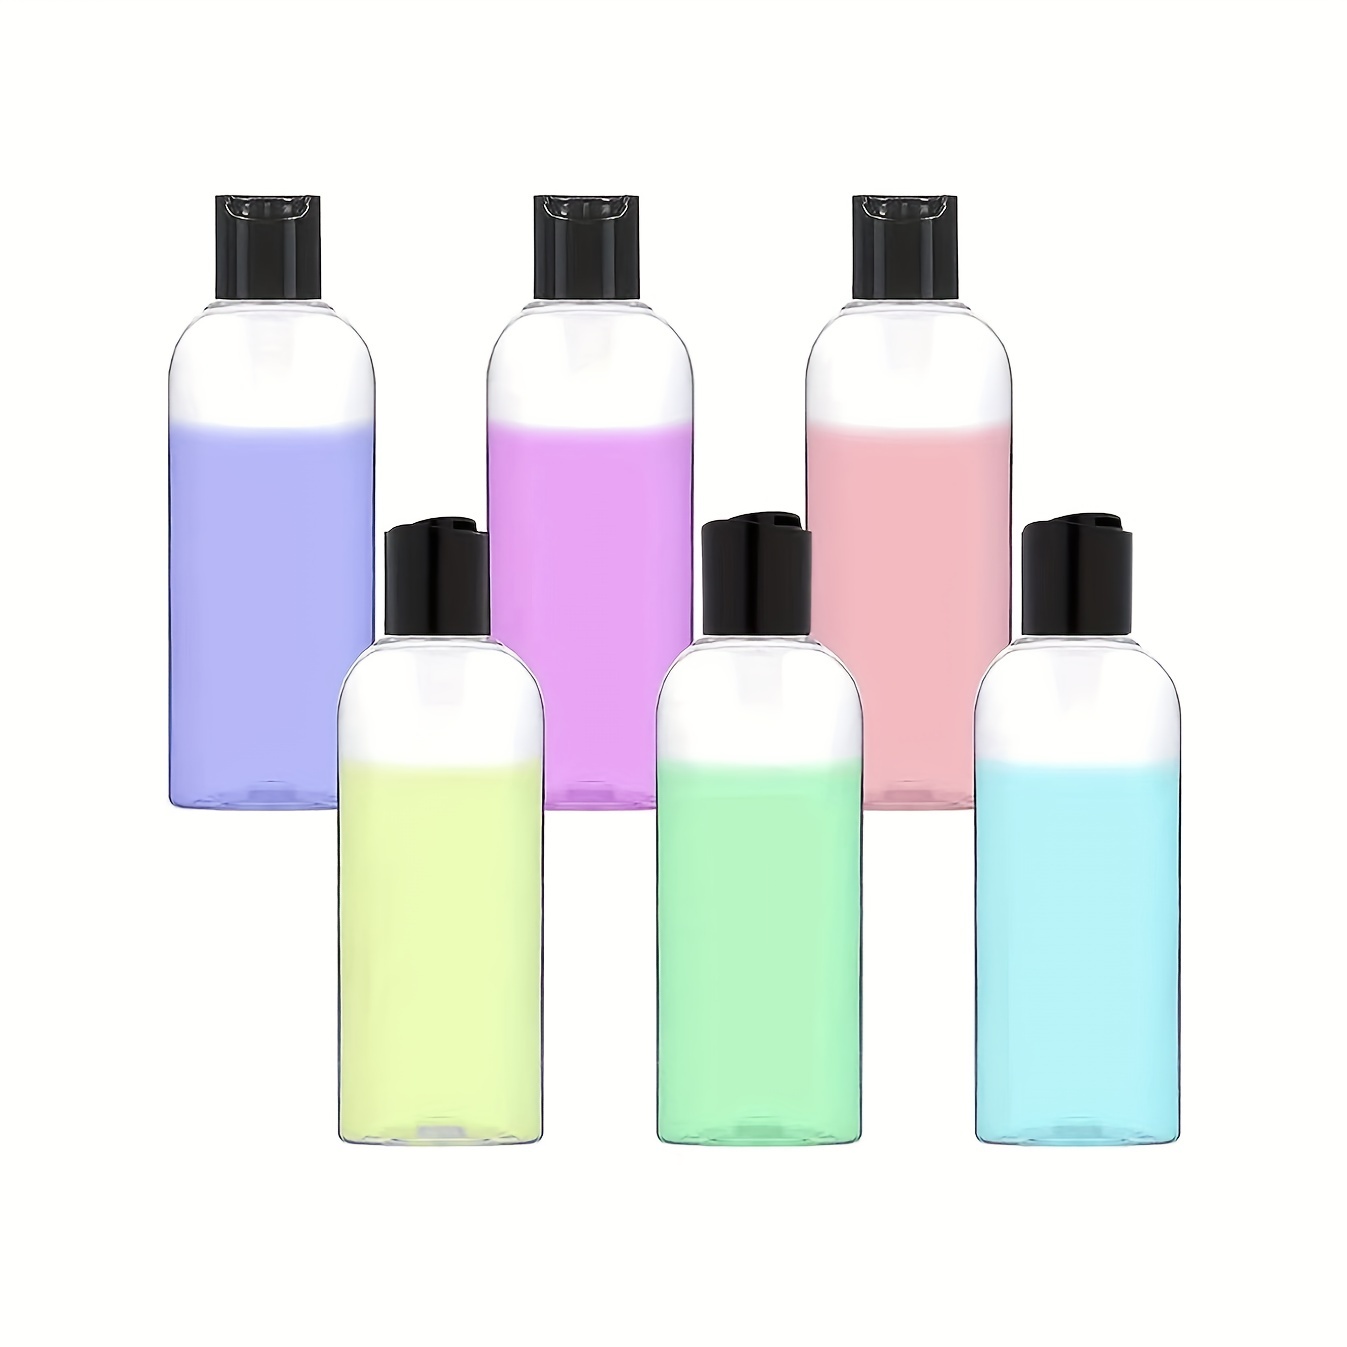 Clear Plastic Empty Squeeze Bottles 5 Pack 3.4oz/100ml with Flip Cap TSA Travel Bottle for Shampoo, Conditioner & Lotion